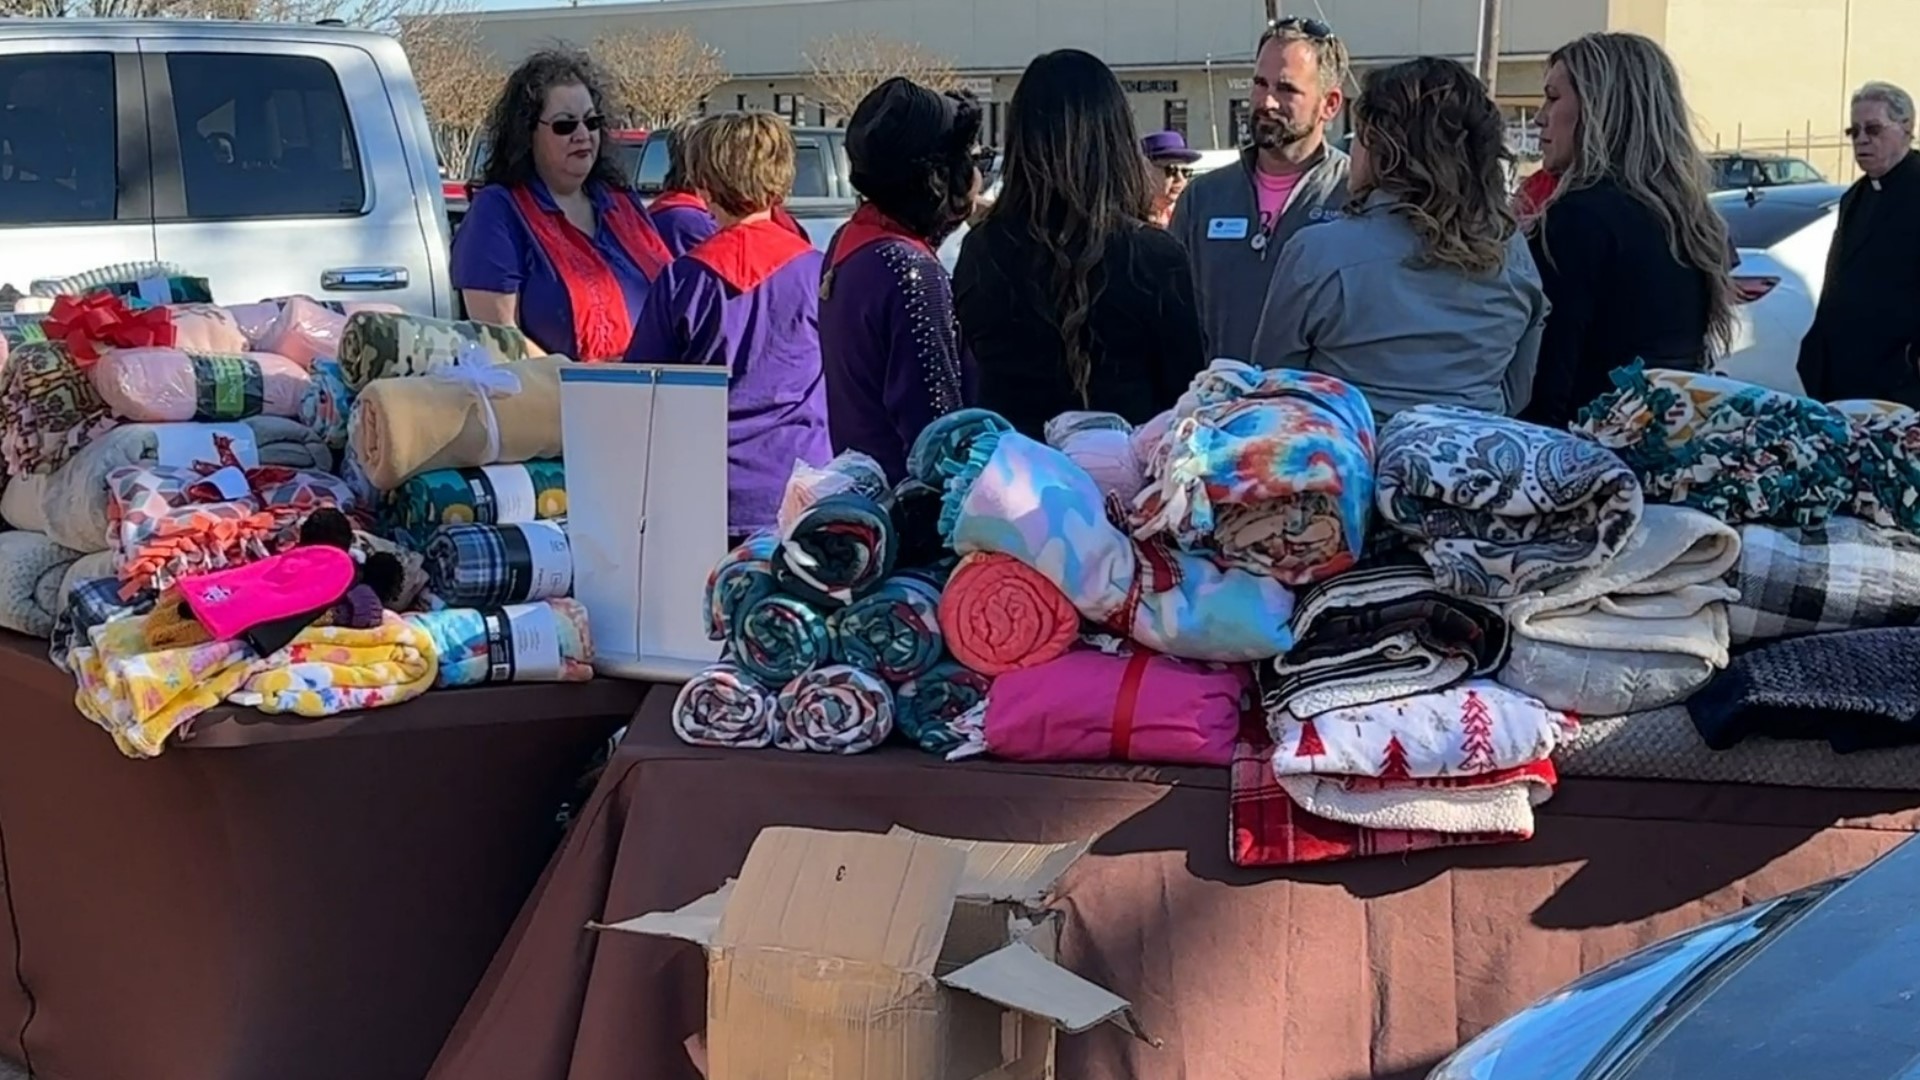 The Sabine Federal Credit Union and the Queenship of Mary # 2776 Catholic Daughters of America are making a blanket donation to the Women & Children’s Shelter.